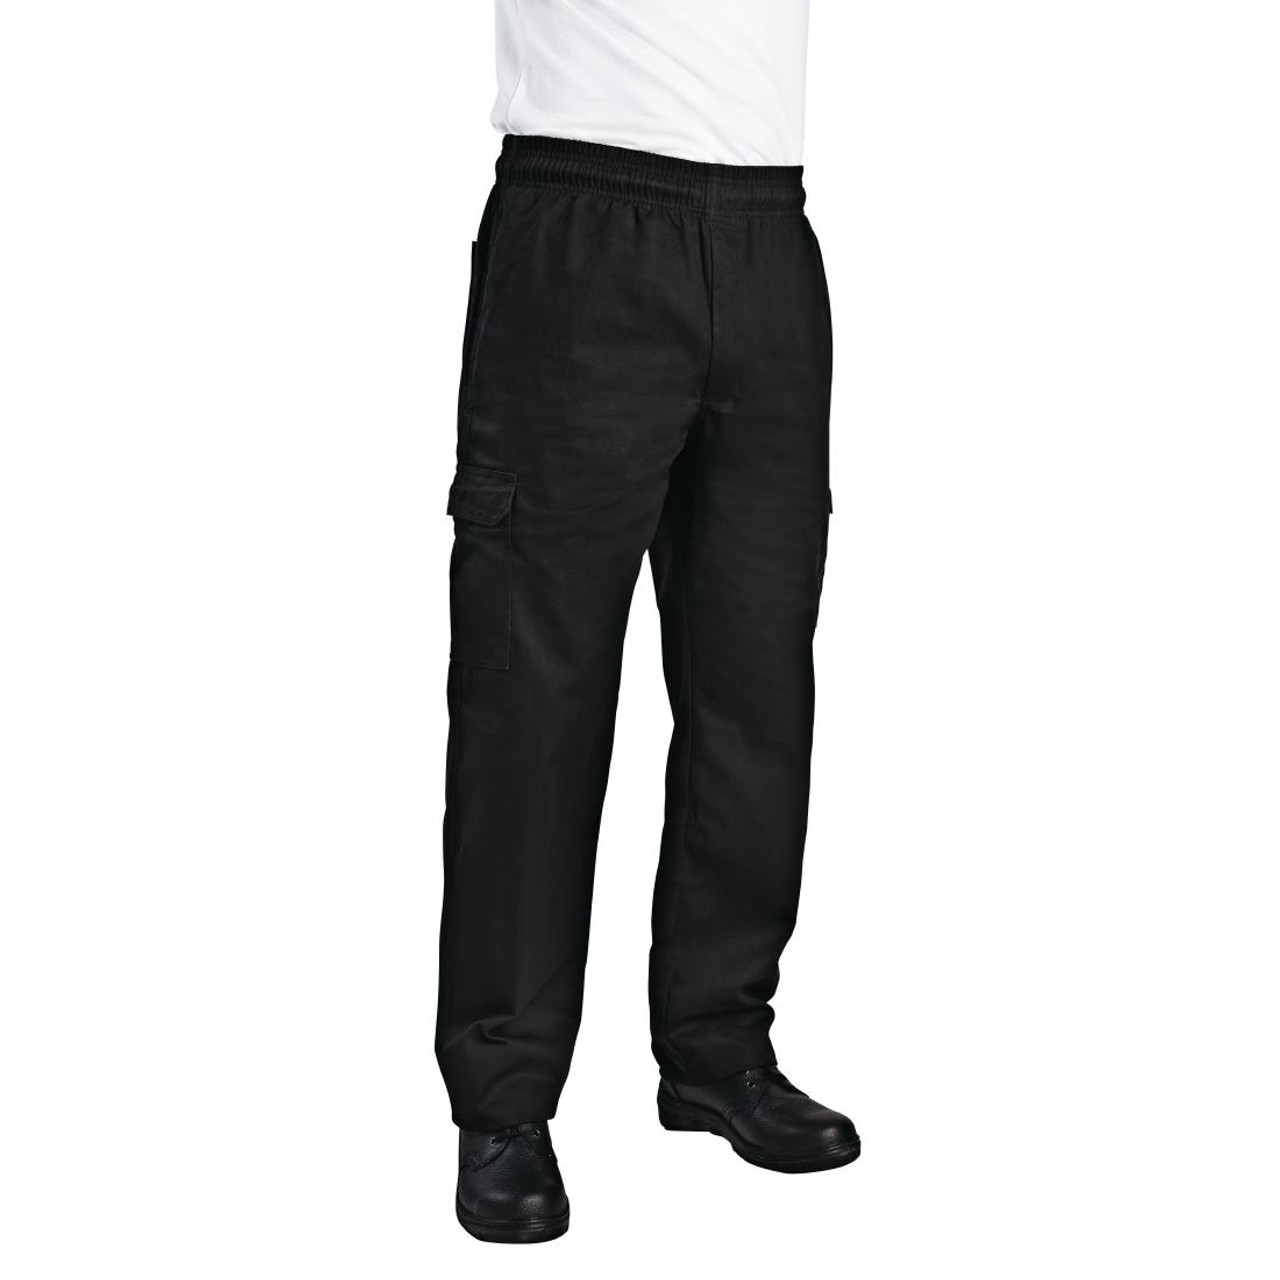 Chef Pants Cook Kitchen Trousers Catering Work Baggy Elastic Waist Uniform  | eBay